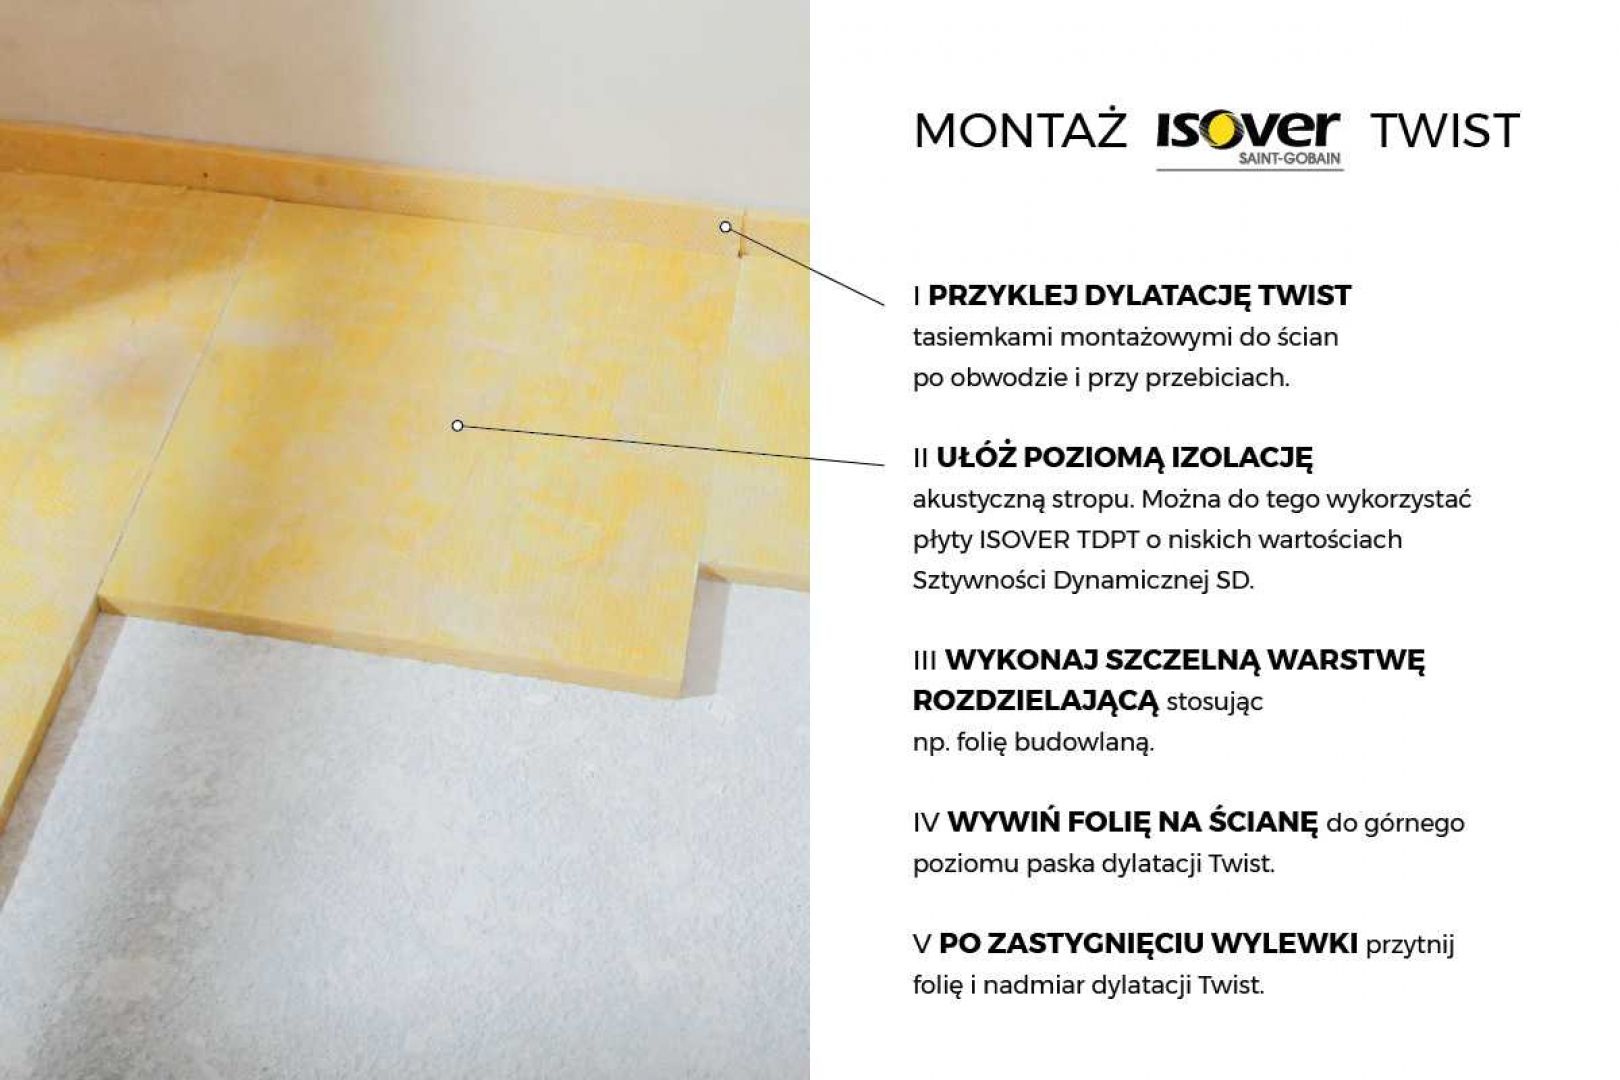 Montaż Isover Twist. Fot. Isover